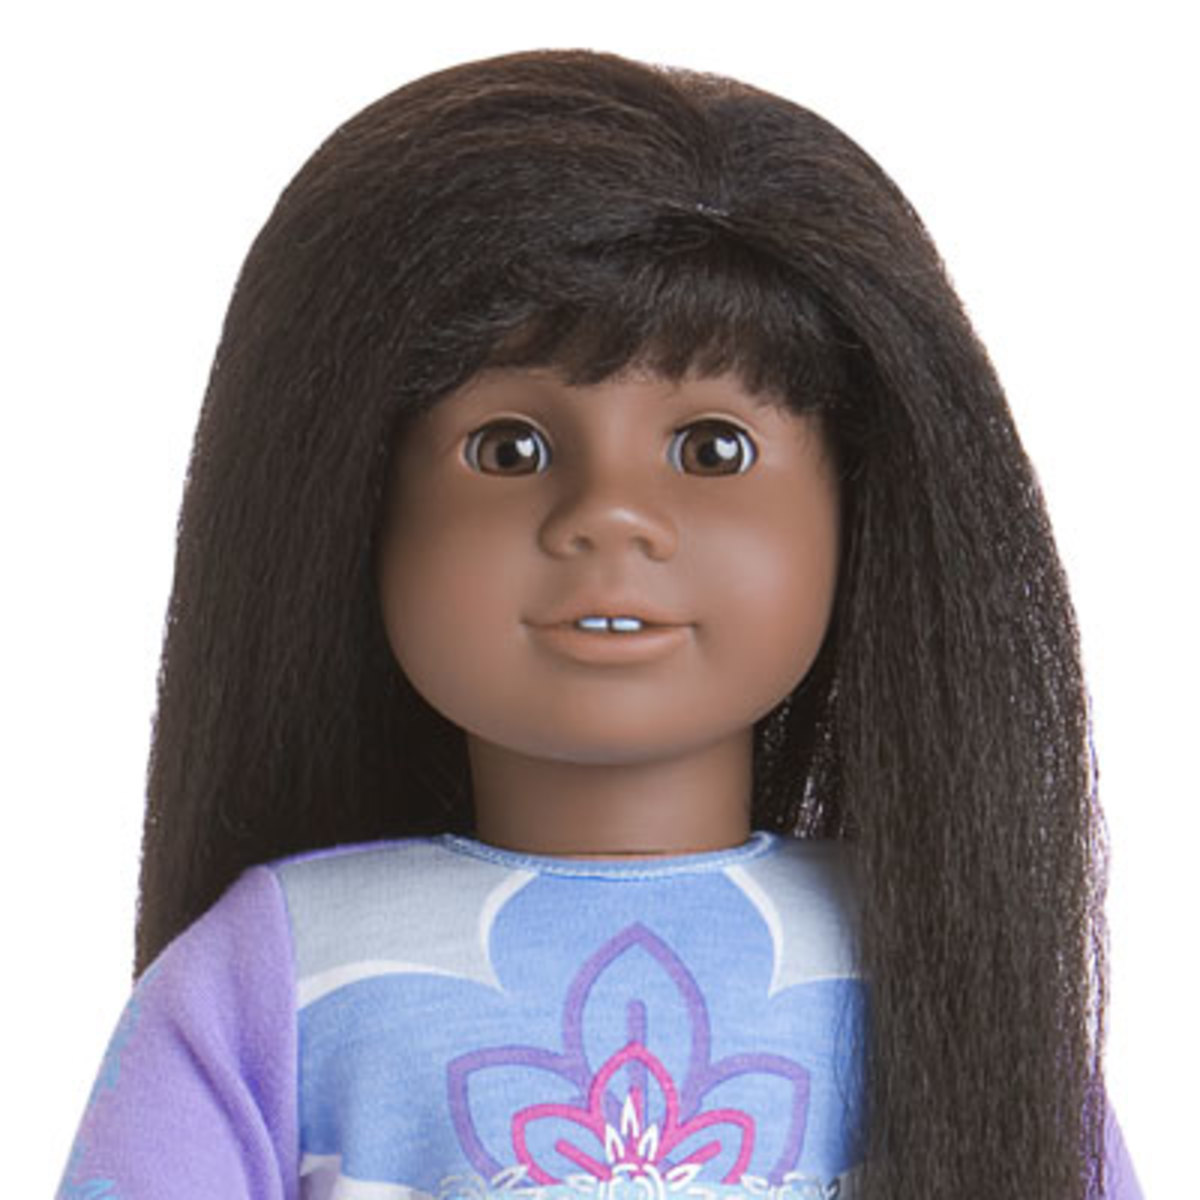 I'm Addicted To American Girl Dolls